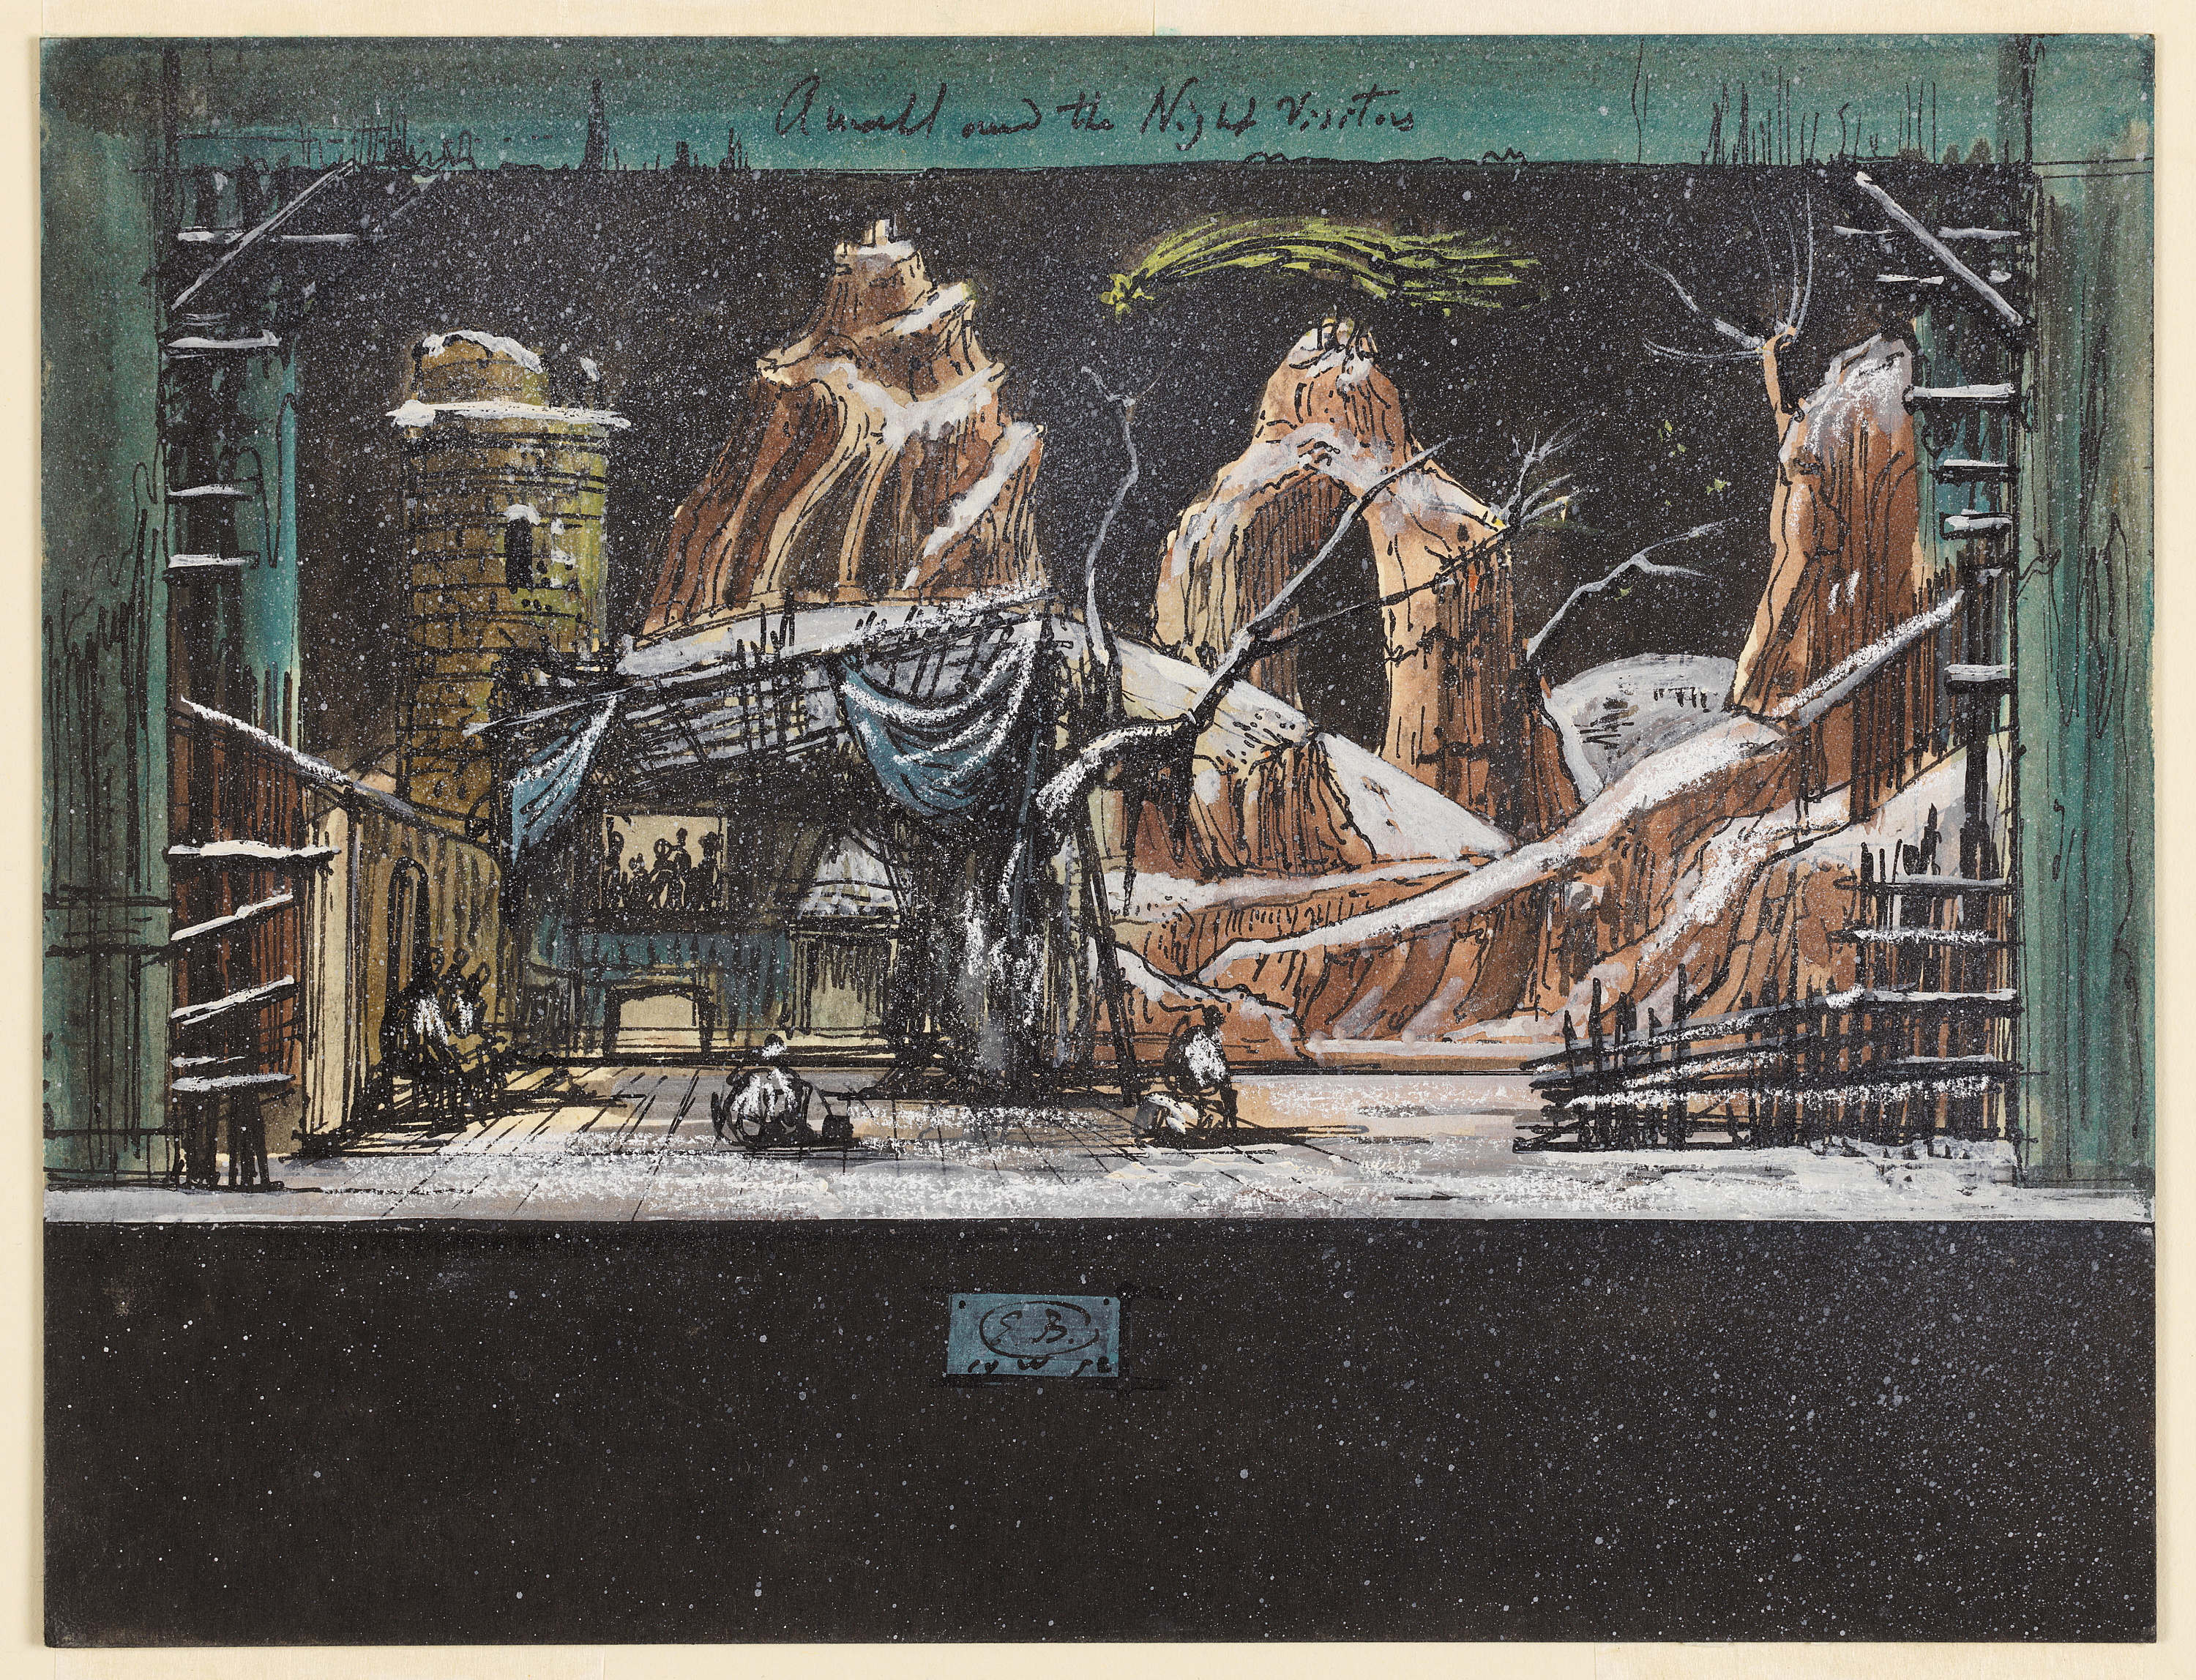 Image features a drawing of a night scene showing an idealized rocky landscape with falling snow. In the sky is the star of Bethlehem. Please scroll down to read the blog post about this object.